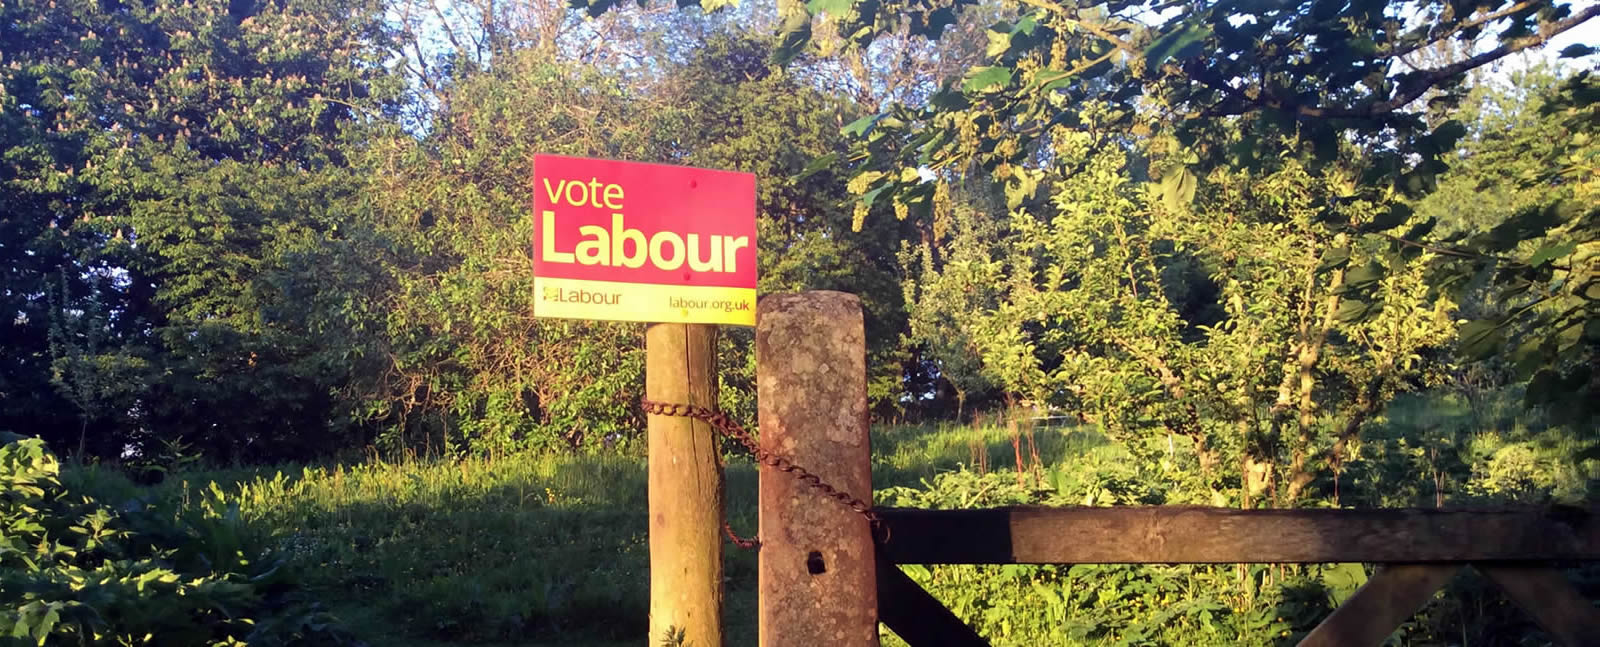 Vote Labour poster in an orchard